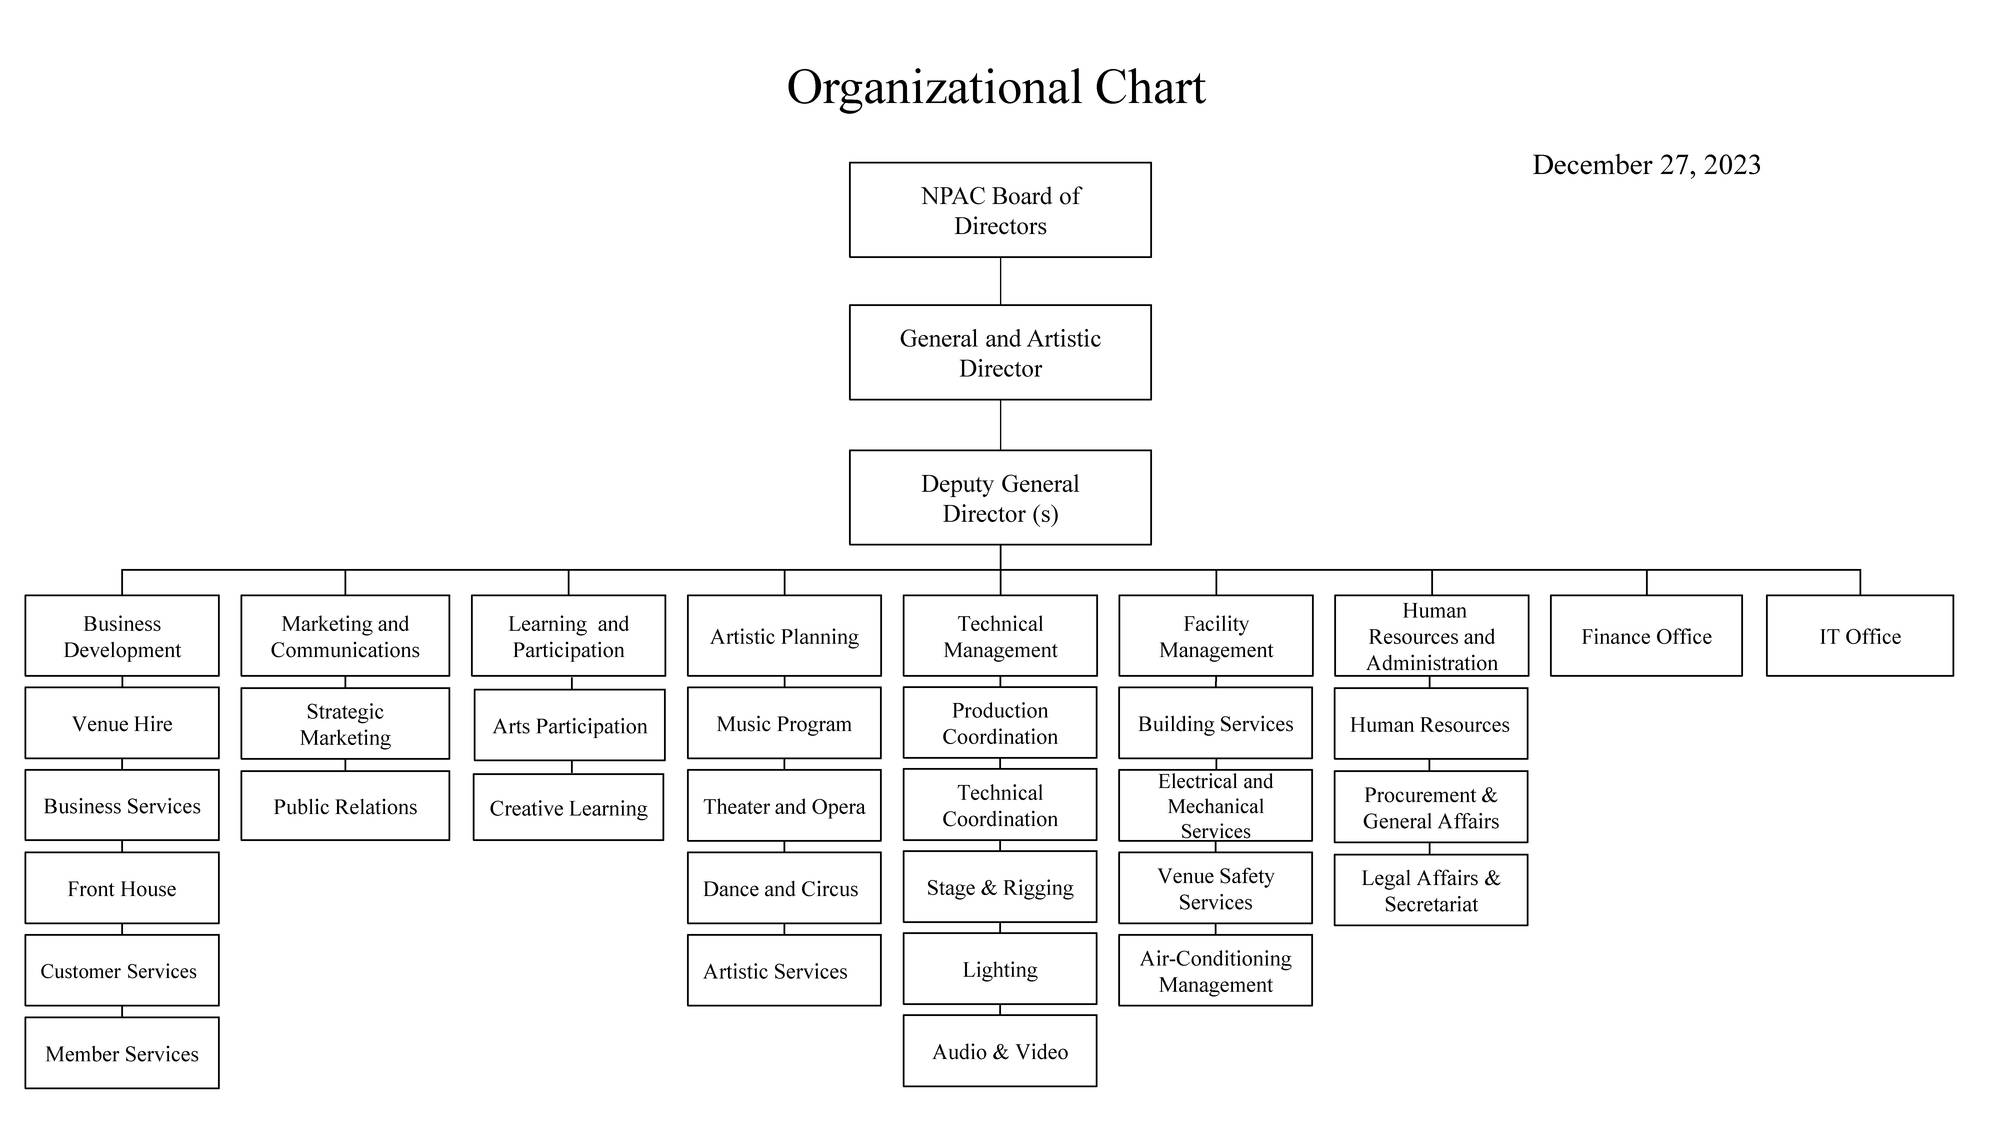 The organizational chart is headed by the board of directors, which consists of one General and Artistic Director and one to three Deputy General Directors, responsible for the management of nine departments: 1. Business Development Department is responsible for rental hiring services, commercial services, front of house services, customer services and member services. 2. Marketing and Communications Department is responsible for marketing strategy and public &amp; media relations. 3. Learning and Participation Department is responsible for the arts participation and creative learning.  4. Artistic Planning Department is responsible for the Music programming, the drama and opera programming, dance and circus programming, and artistic services. 5. Technical Management Department is responsible for production planning, technical coordination, stage technical, lighting, and audio &amp; visual technical services. 6. Facility Management Department is responsible for electrical and building services, mechanical services, venue safety services, and air-conditioning management. 7. Administration Department is responsible for human resources, procurement &amp; general affairs, and legal affairs &amp; secretariat. 8. Finance office is responsible for accounting and financial control. 9. IT office is responsible for information system services and cyber security.